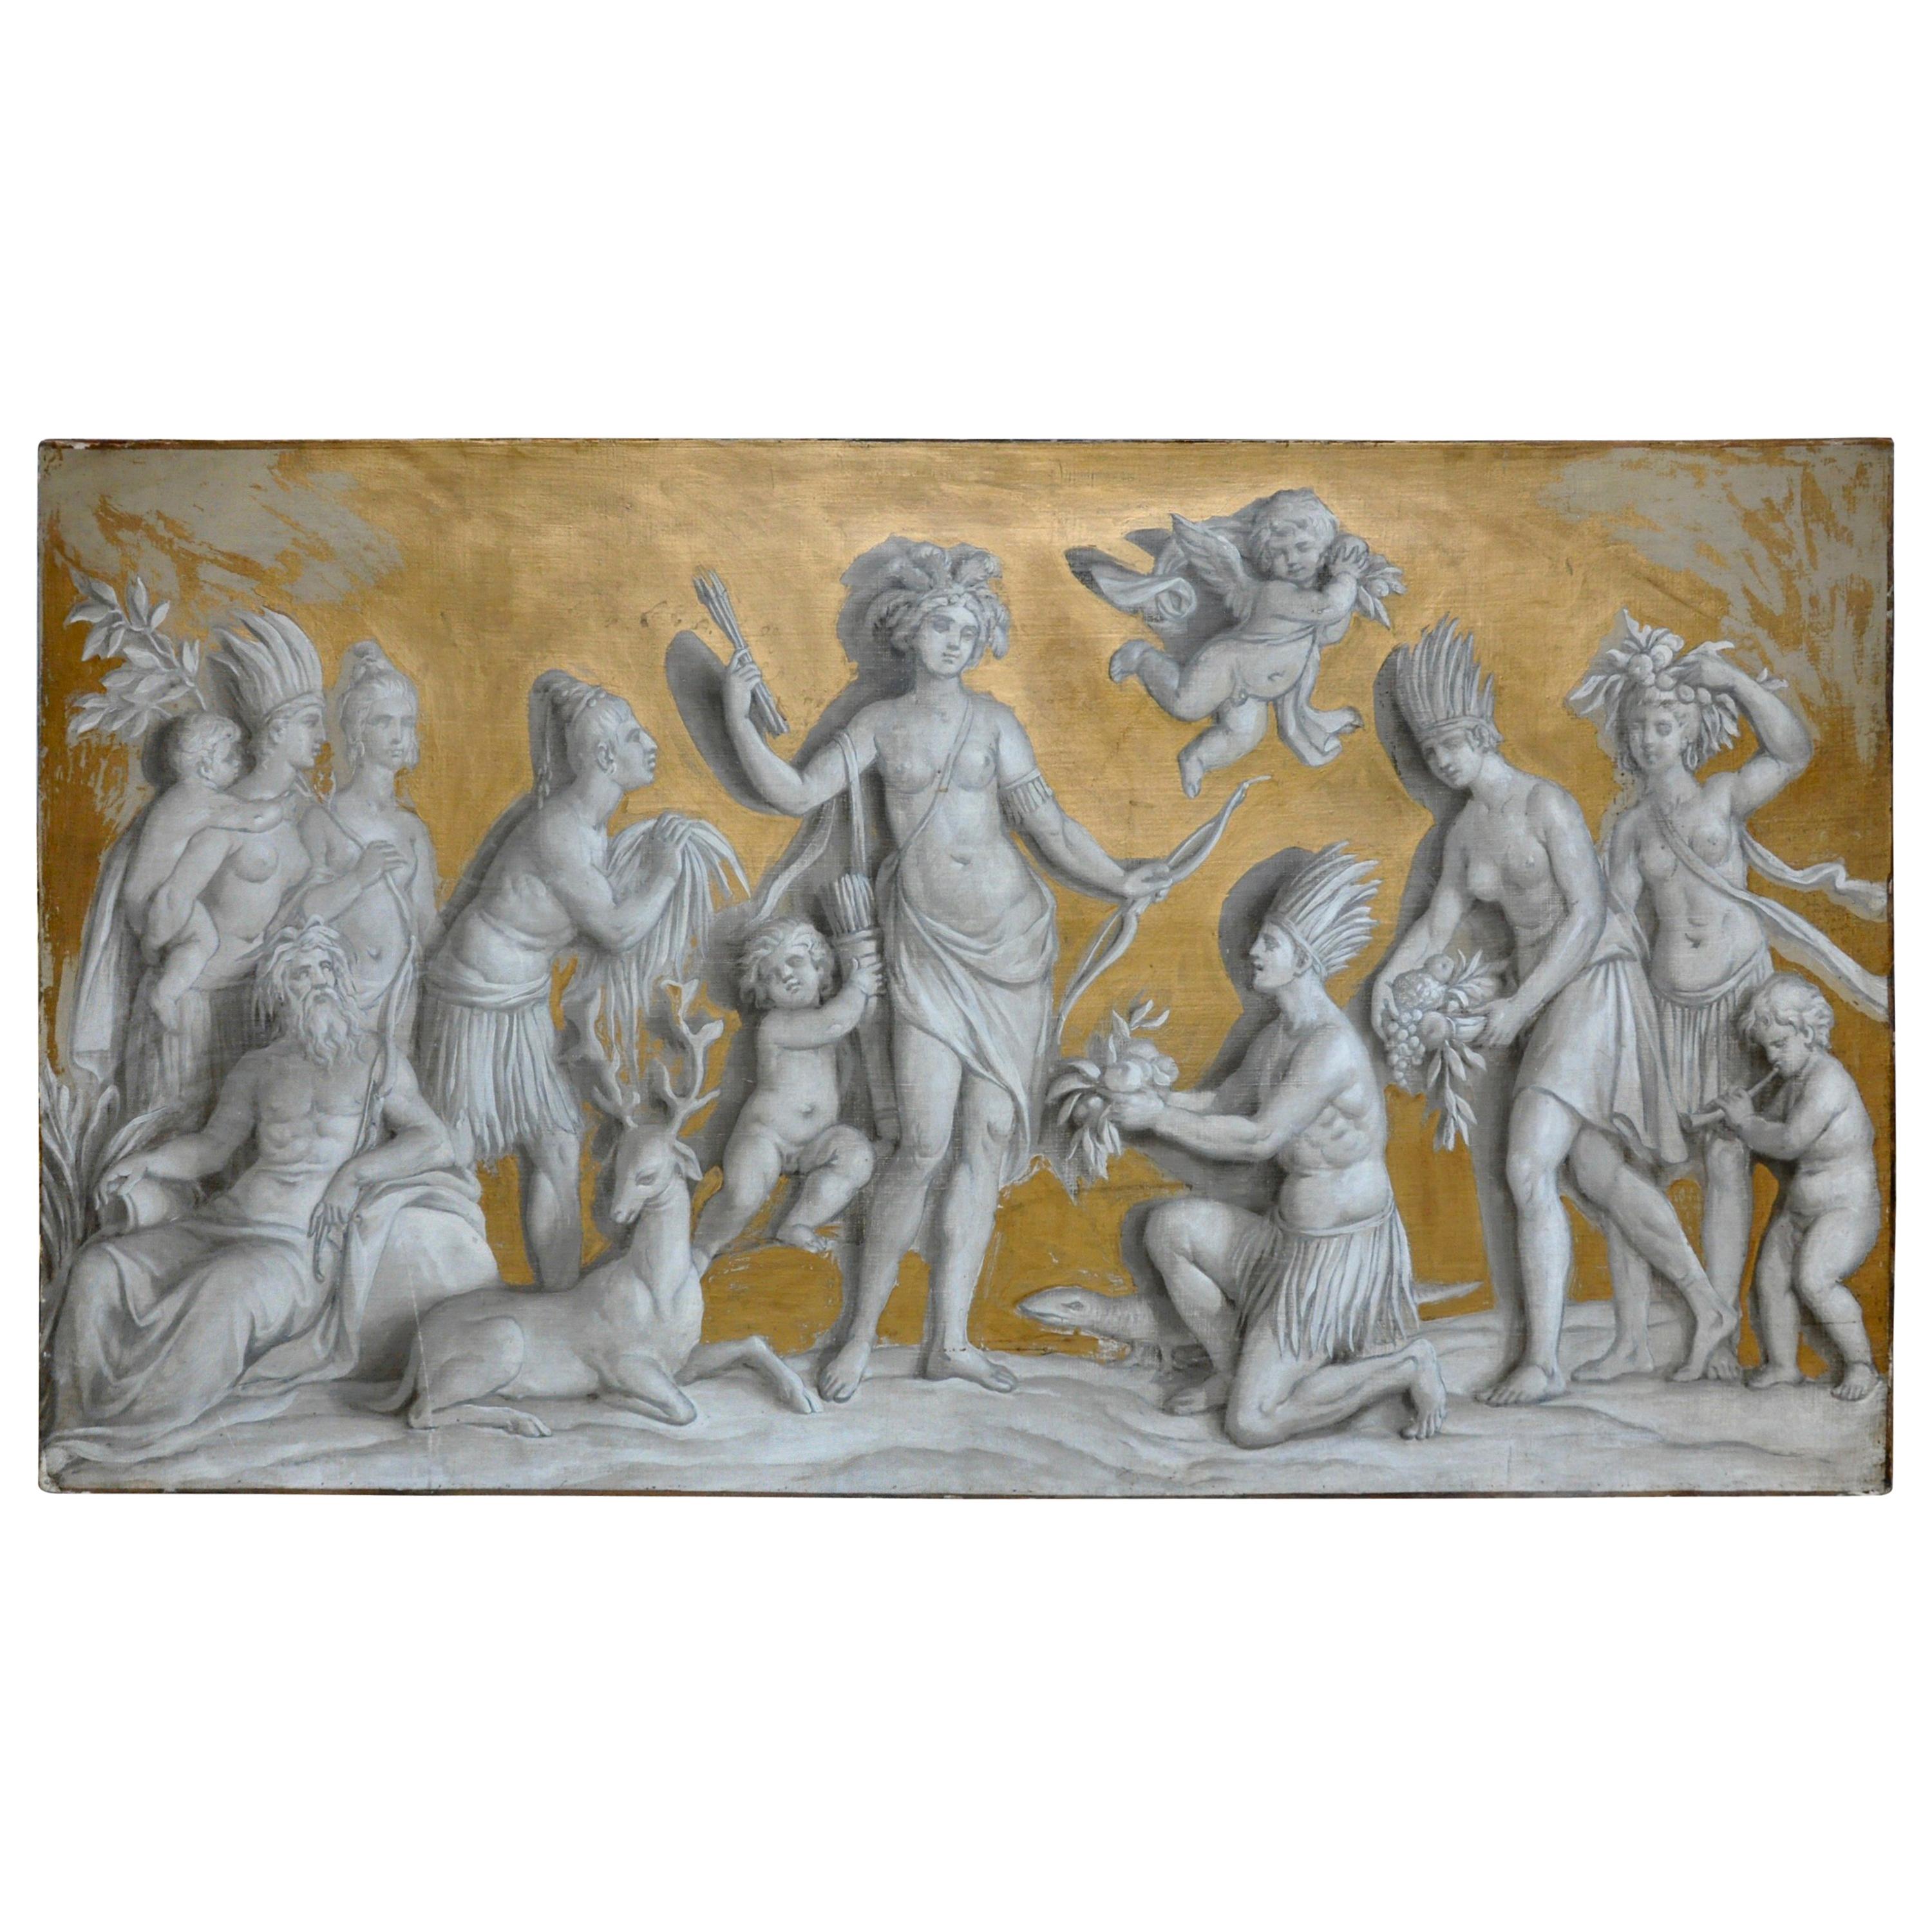 19th Century French Neoclassical Grisaille over Door Panel of the Americas